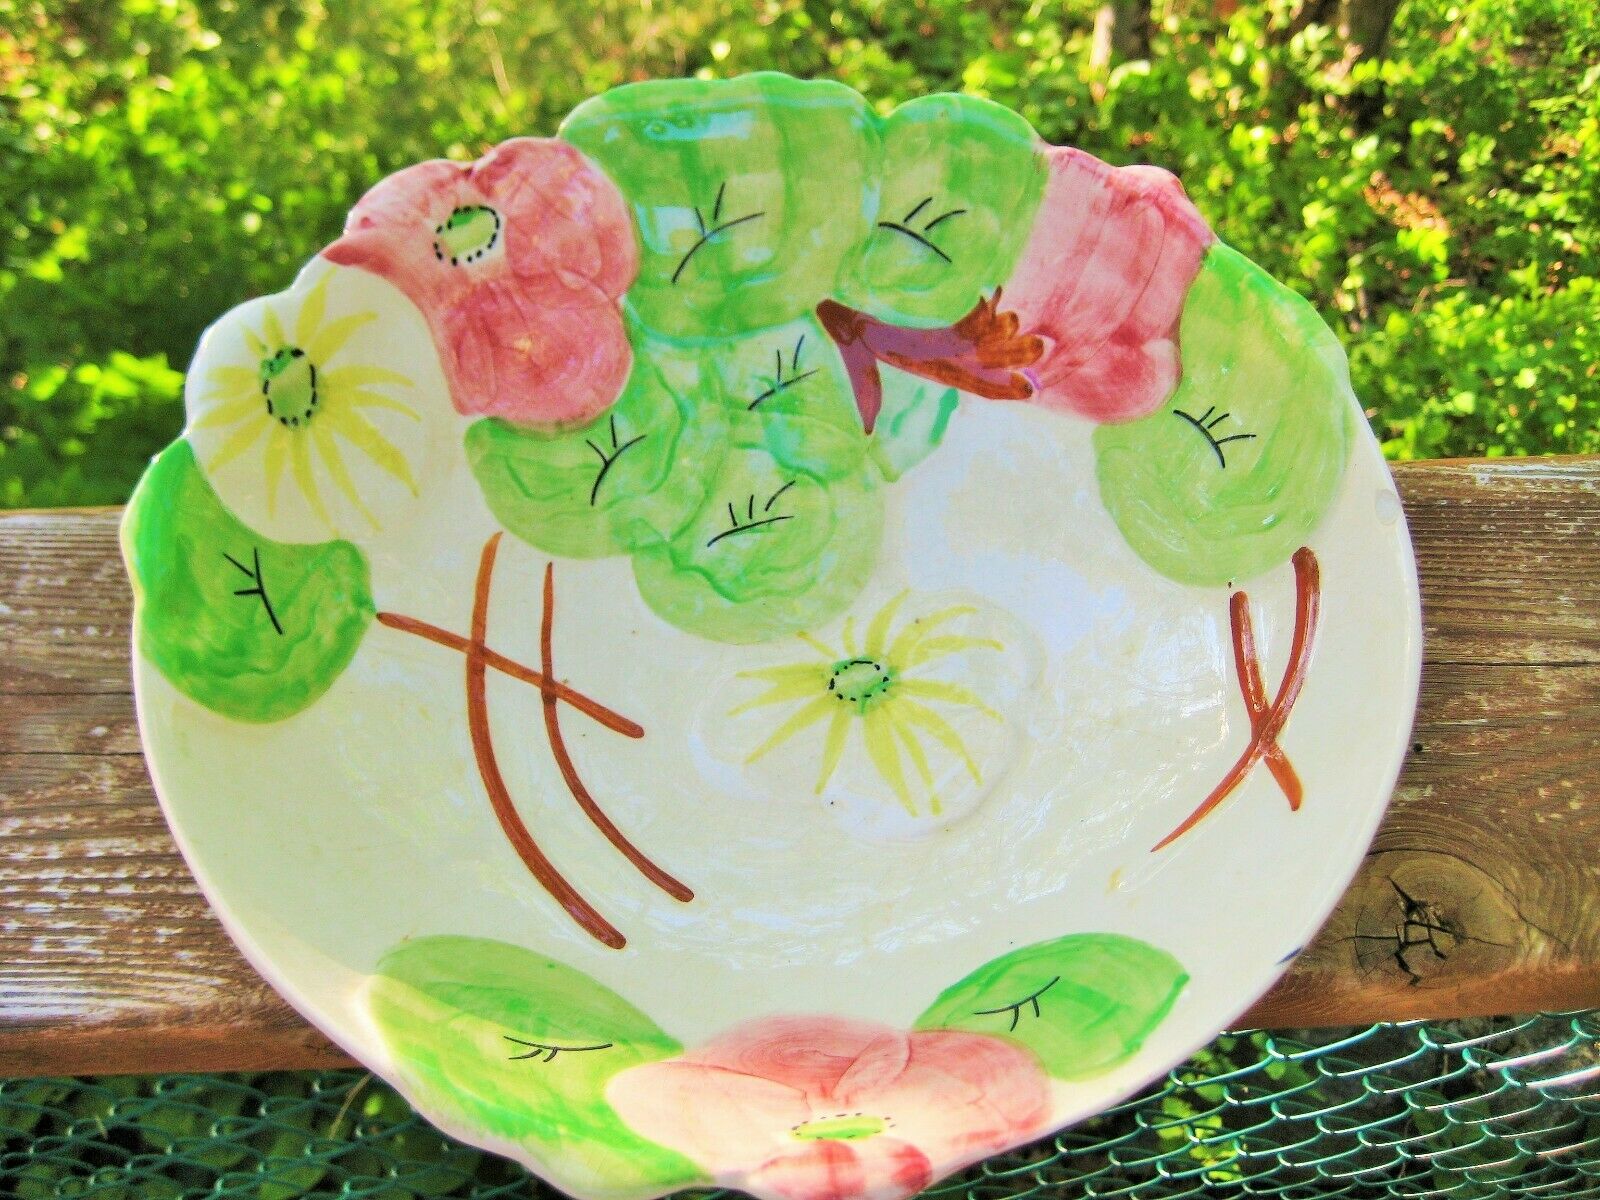 VINTAGE AVON WARE ART DECO FOOTED SERVING BOWL WITH RAISED FLORAL DESIGN ENGLAND